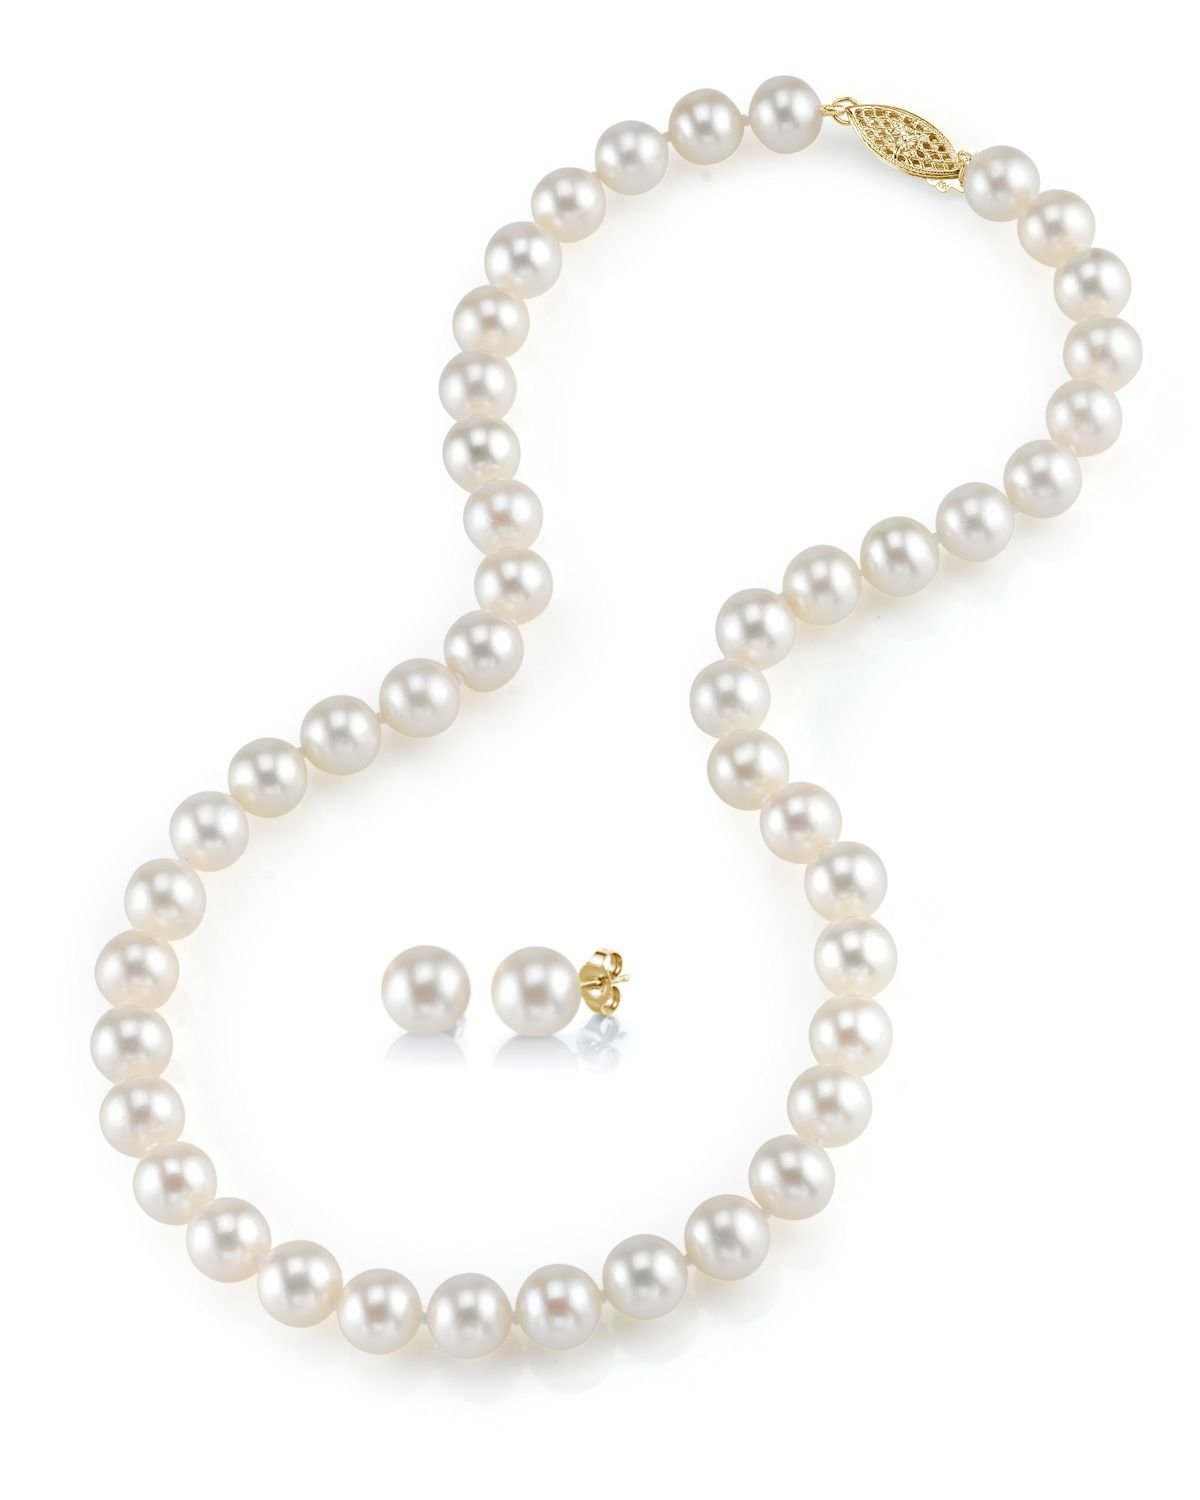 8.0-8.5mm Freshwater Pearl Necklace & Earrings - Secondary Image